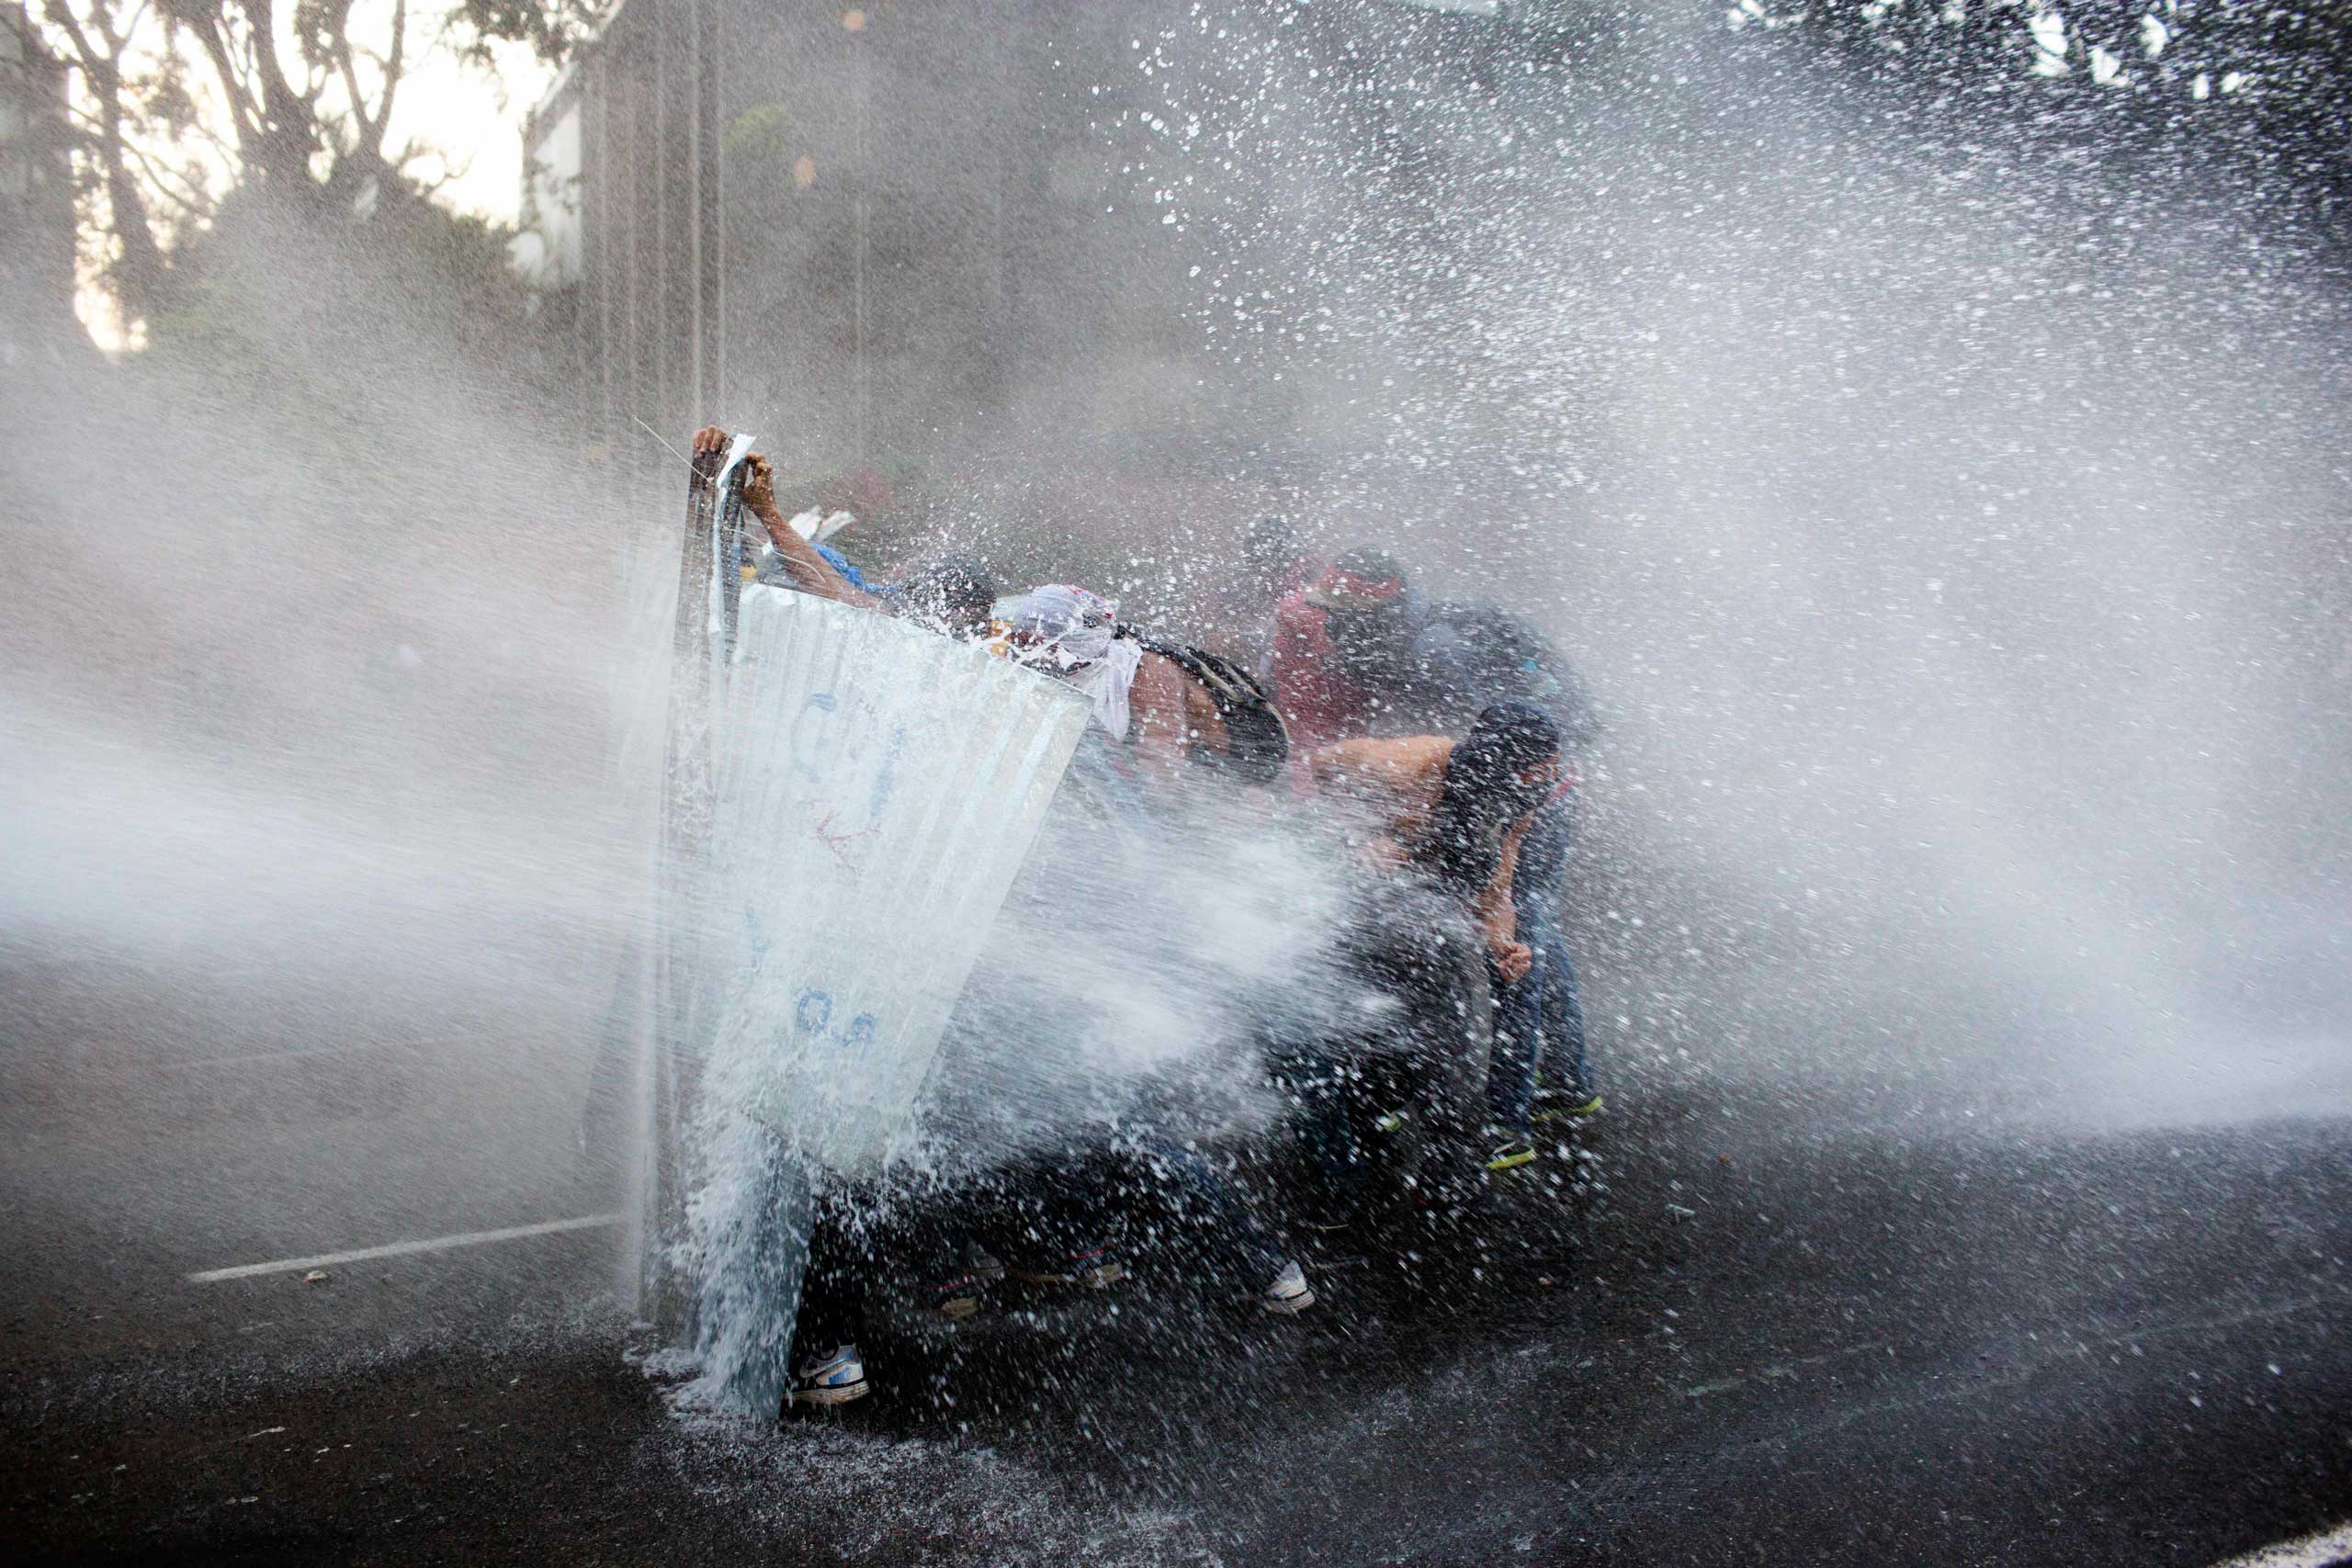 Mashable: 2014 Photos of the YearAnti-government demonstrators take cover from a police water cannon in Caracas, Venezuela, Feb. 28, 2014.